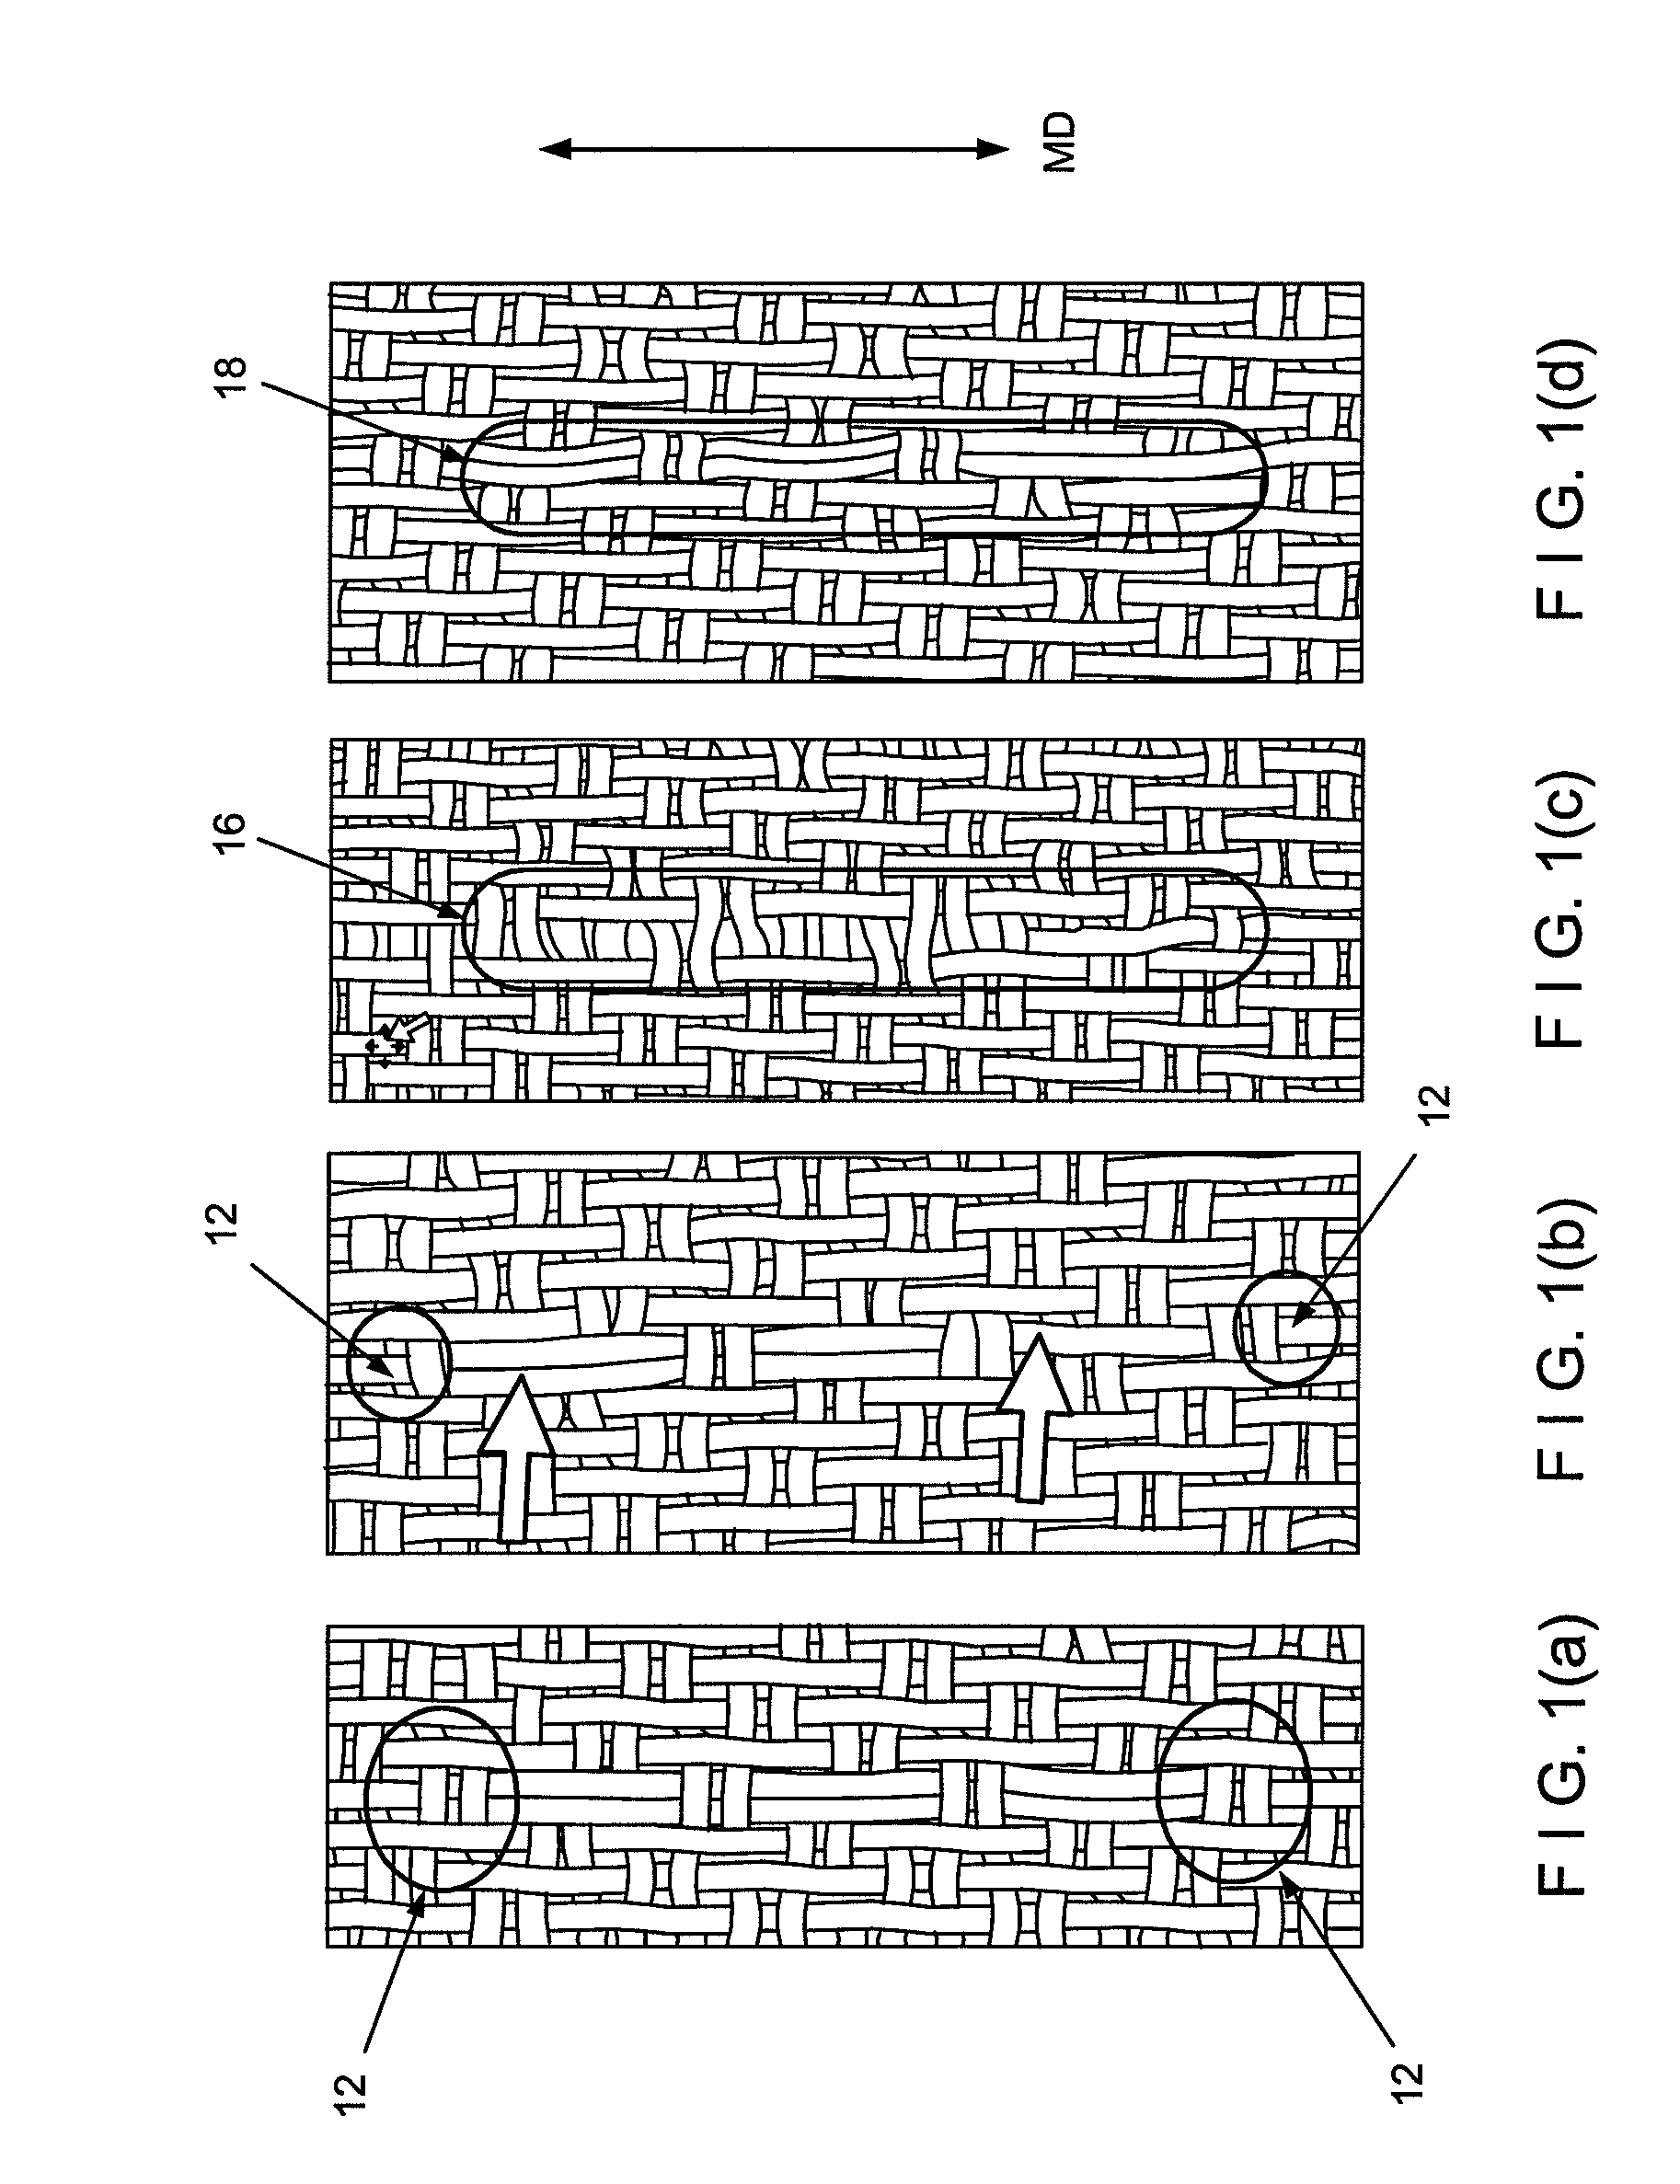 Formation of a fabric seam by ultrasonic gap welding of a flat woven fabric